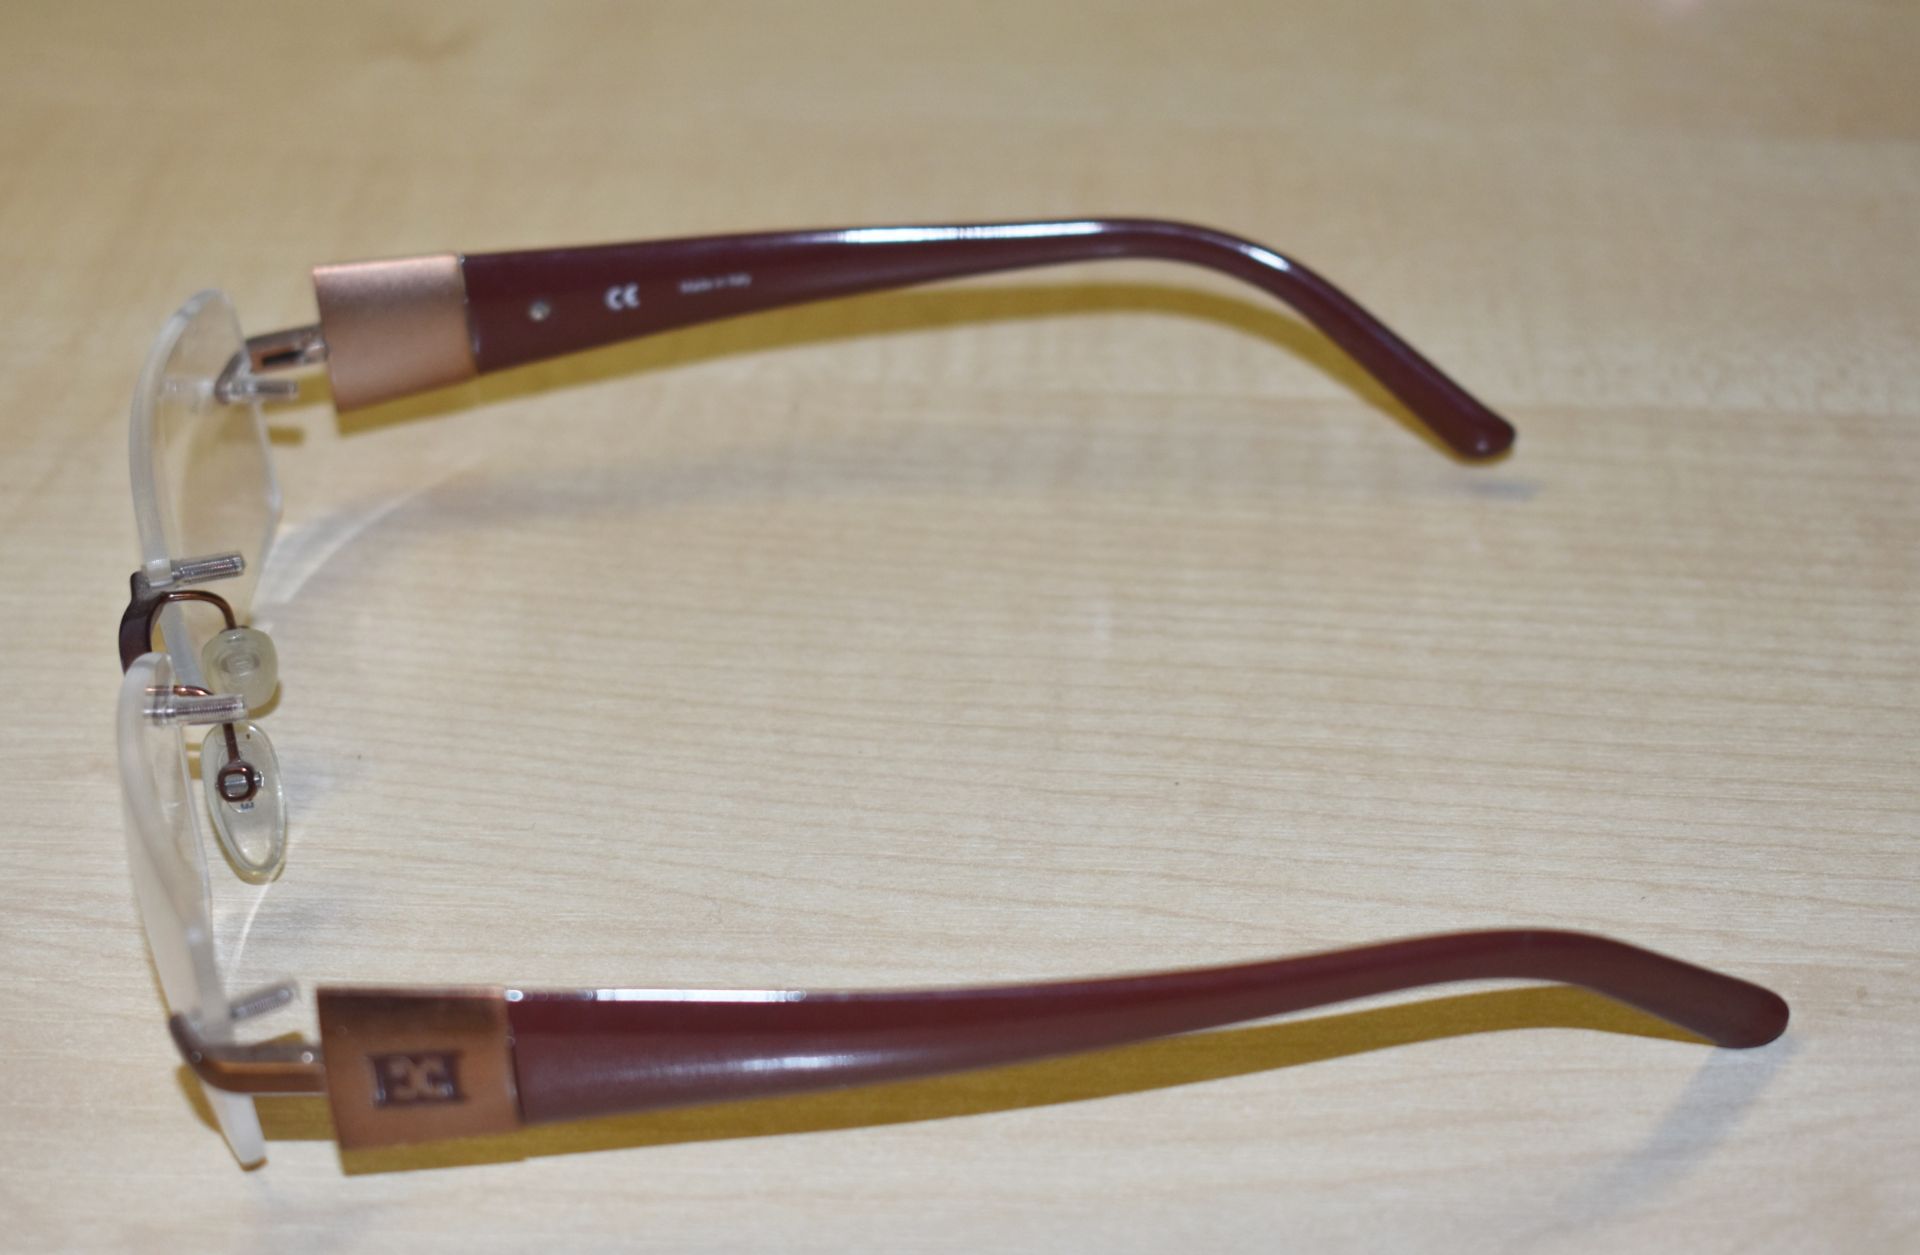 1 x Genuine ESCADA Spectacle Eye Glasses Frame - Ex Display Stock  - Ref: GTI199 - CL645 - Location: - Image 7 of 8